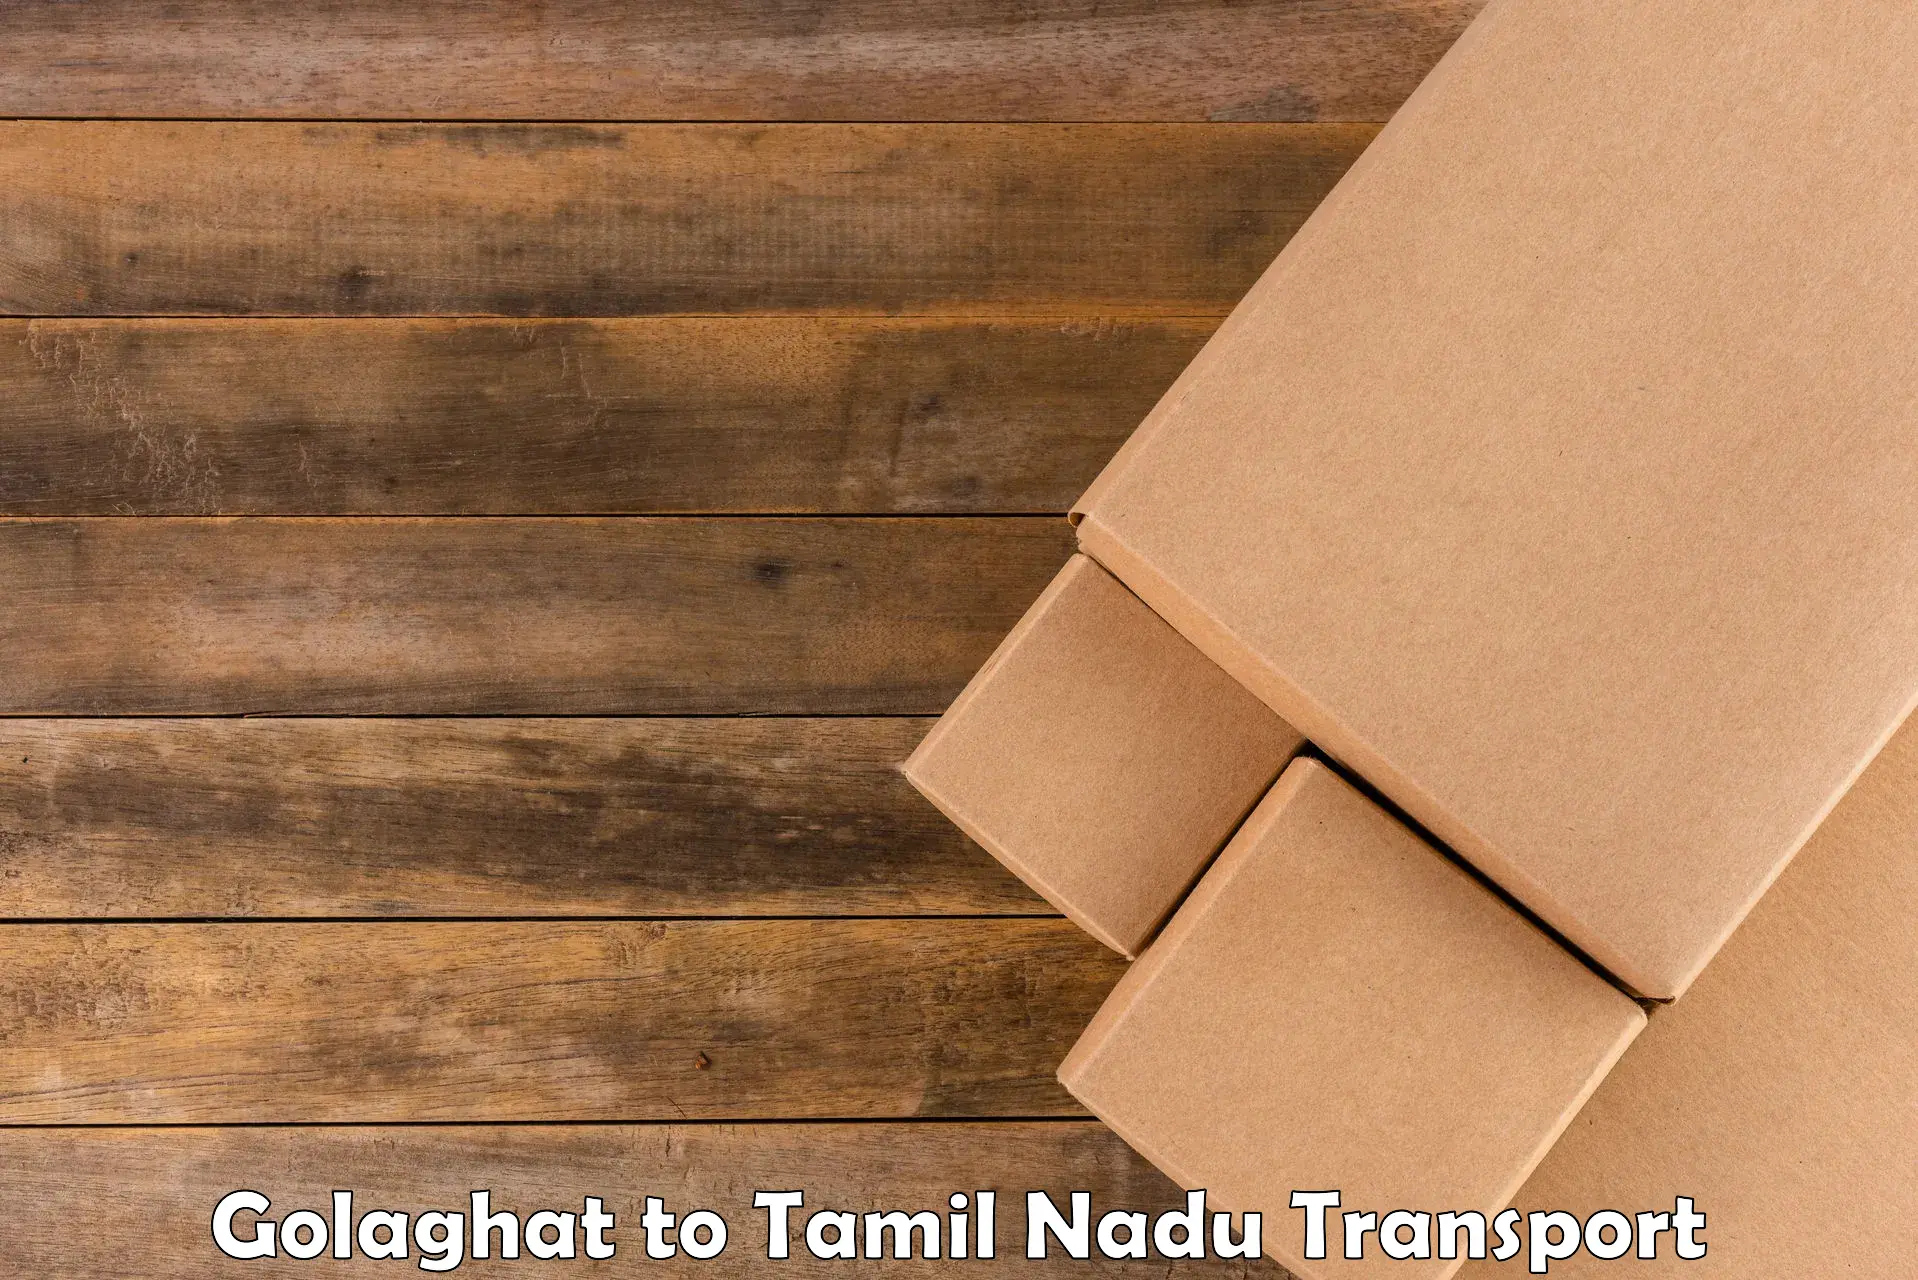 Cycle transportation service Golaghat to Tamil Nadu